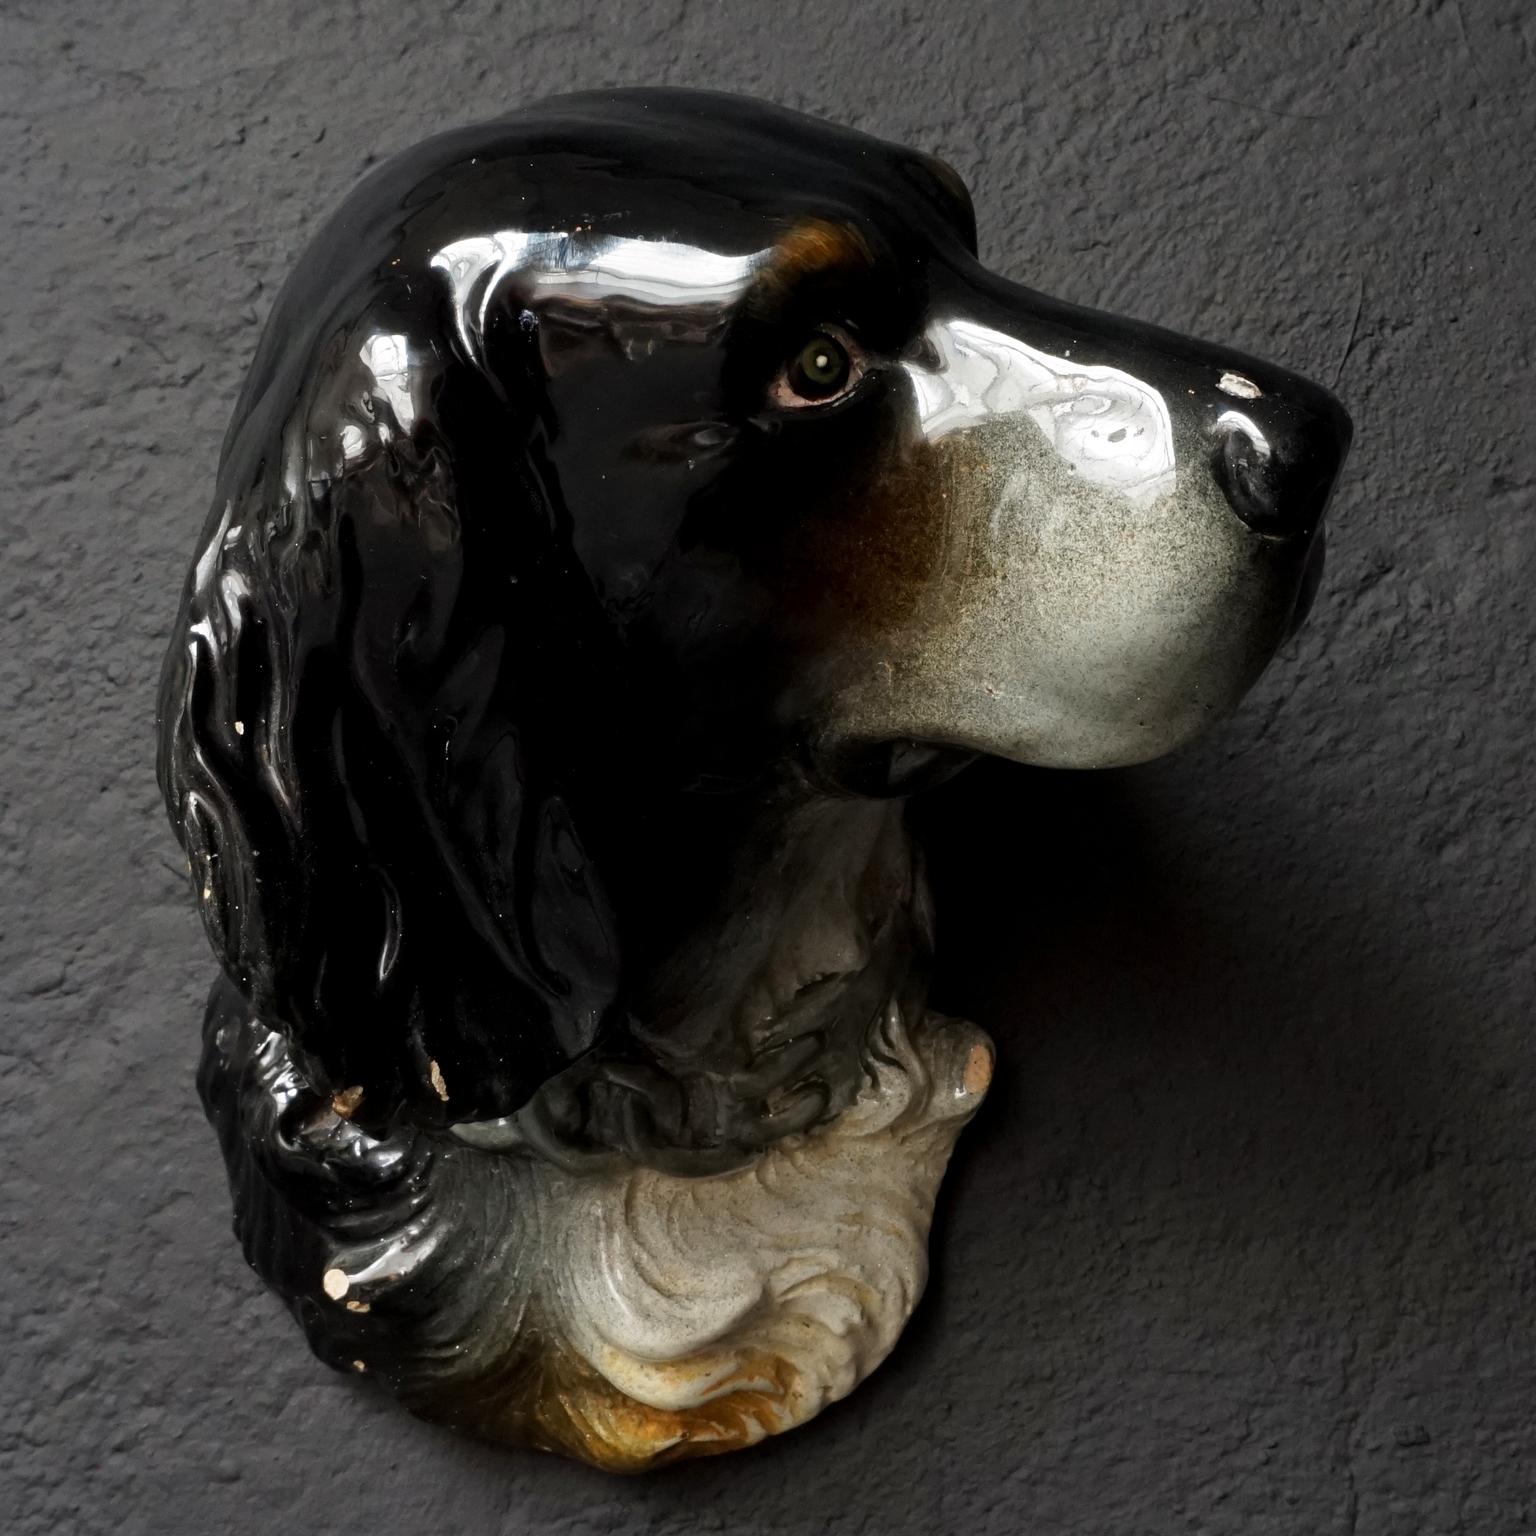 Large original Massier majolica French pottery dog wall pocket with ink signature from the late 19th century.
Signed Delphin Massier Vallauris (AM) 4 on the back.

The Massier family of Vallauris is recognized for three members producing majolica